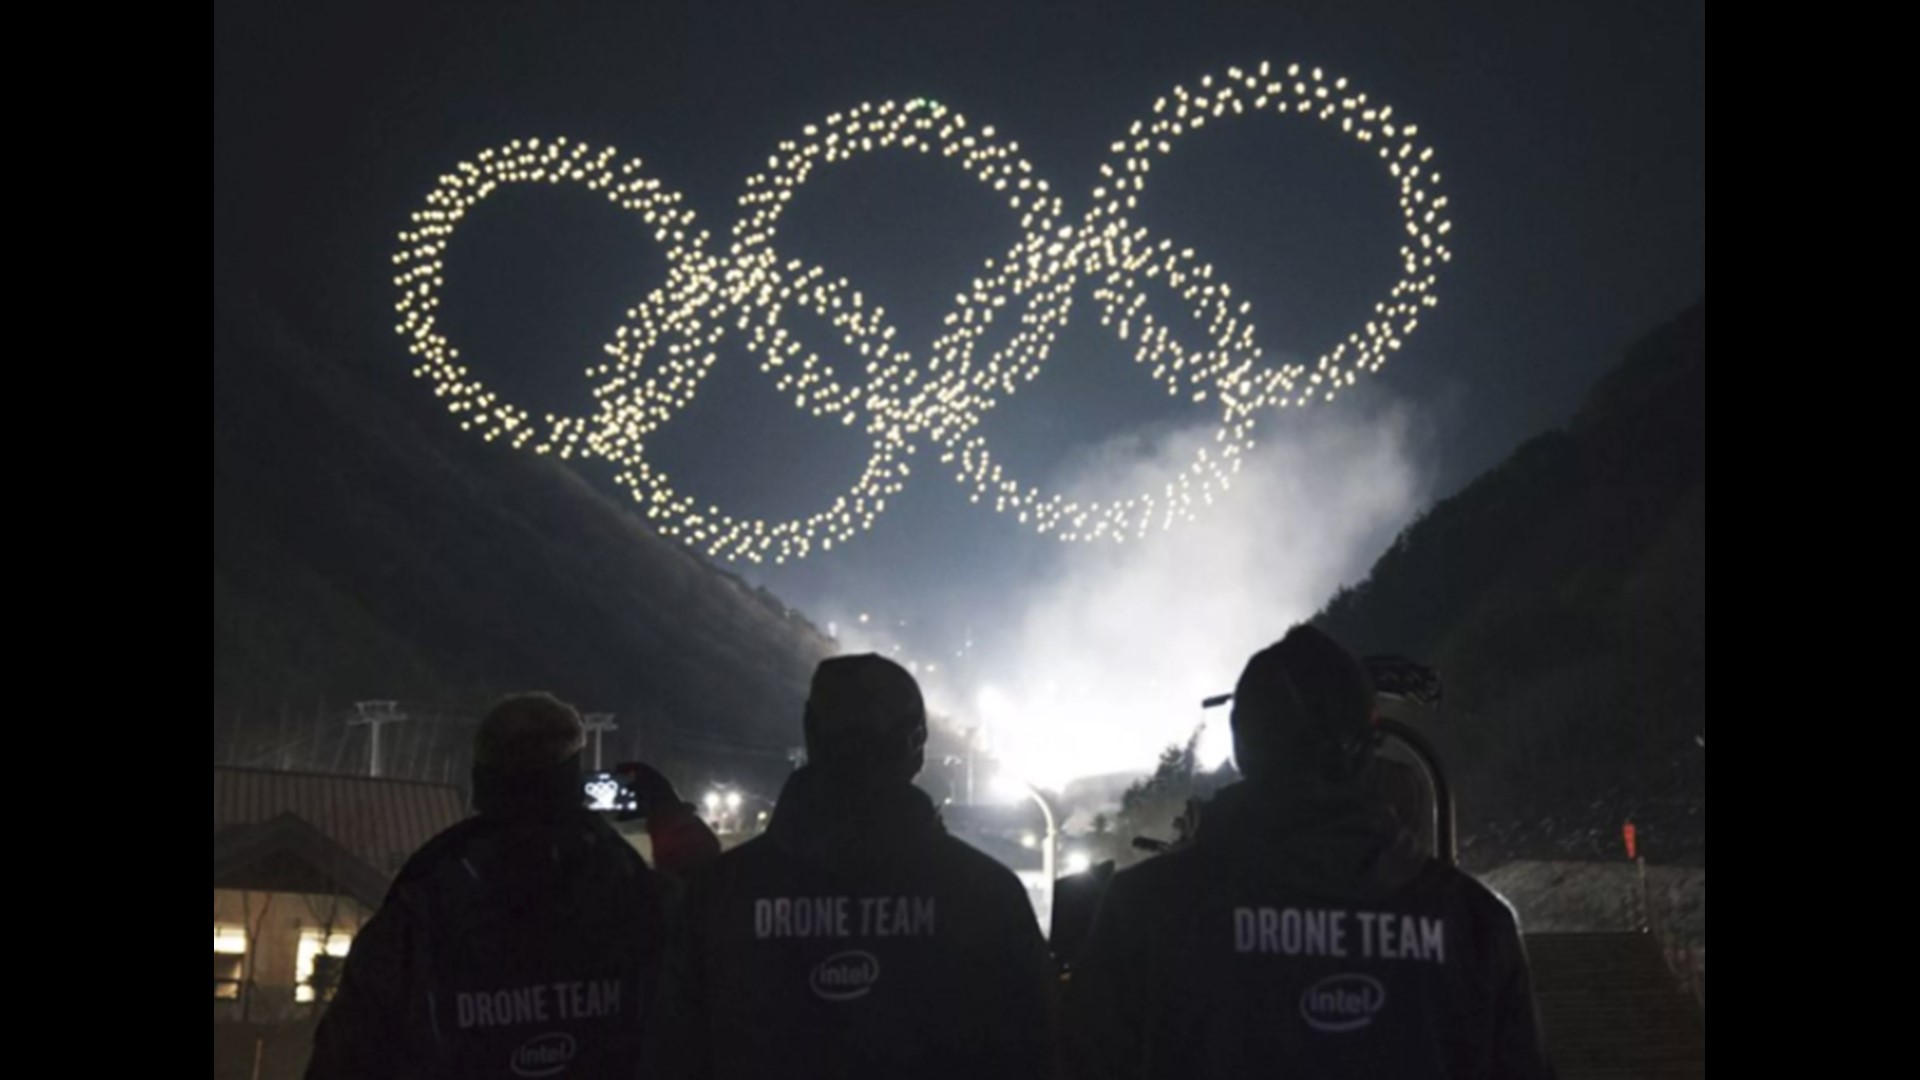 Drone Light Show Is Scrapped After Logistical Challenges At Winter Olympics Opening Ceremony 